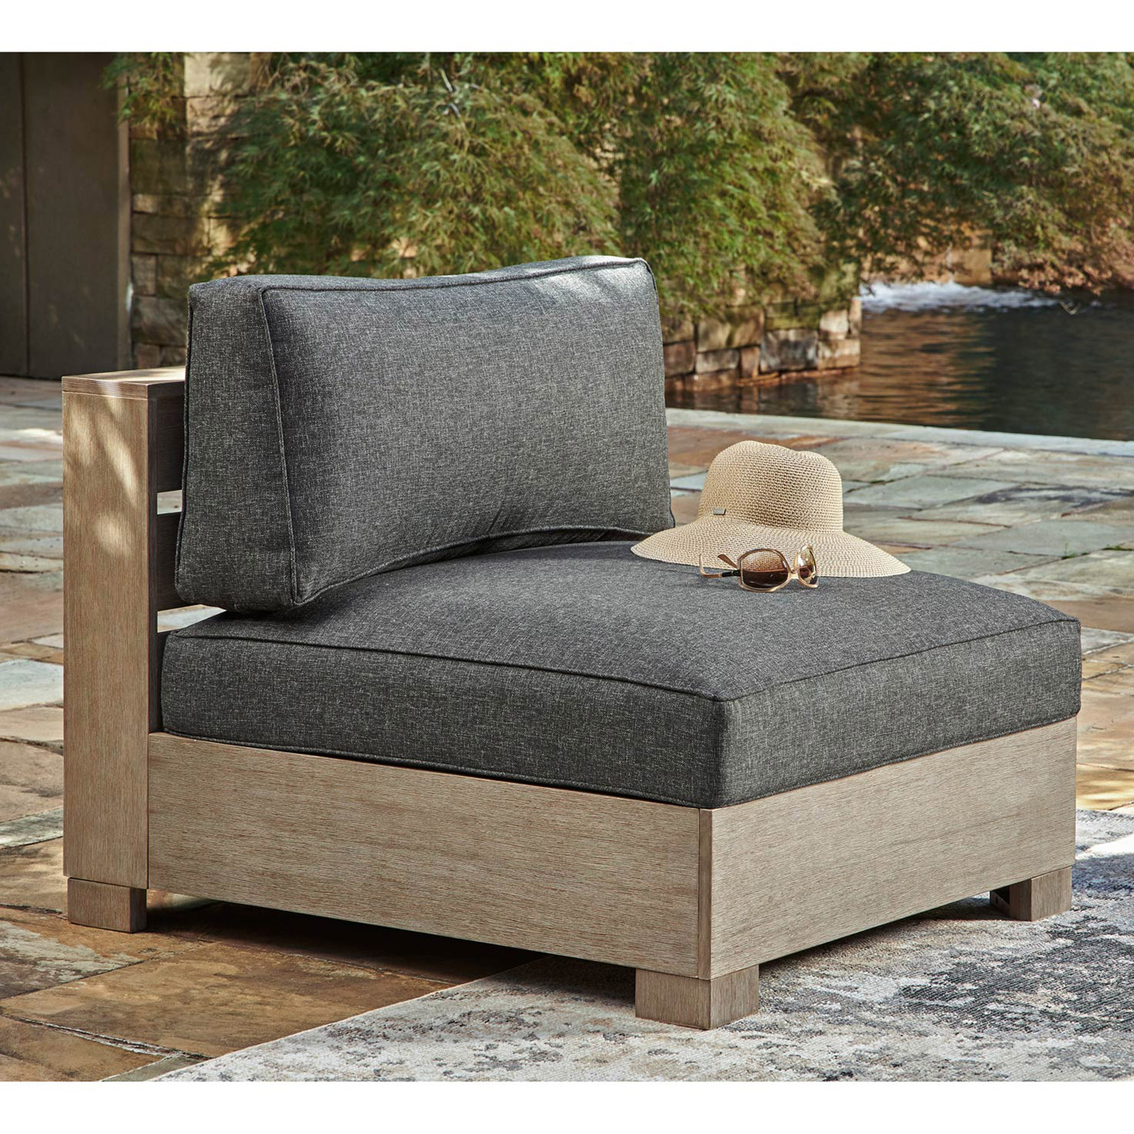 Signature Design by Ashley Citrine Park 6 pc. Outdoor Sectional with Coffee & End - Image 4 of 10